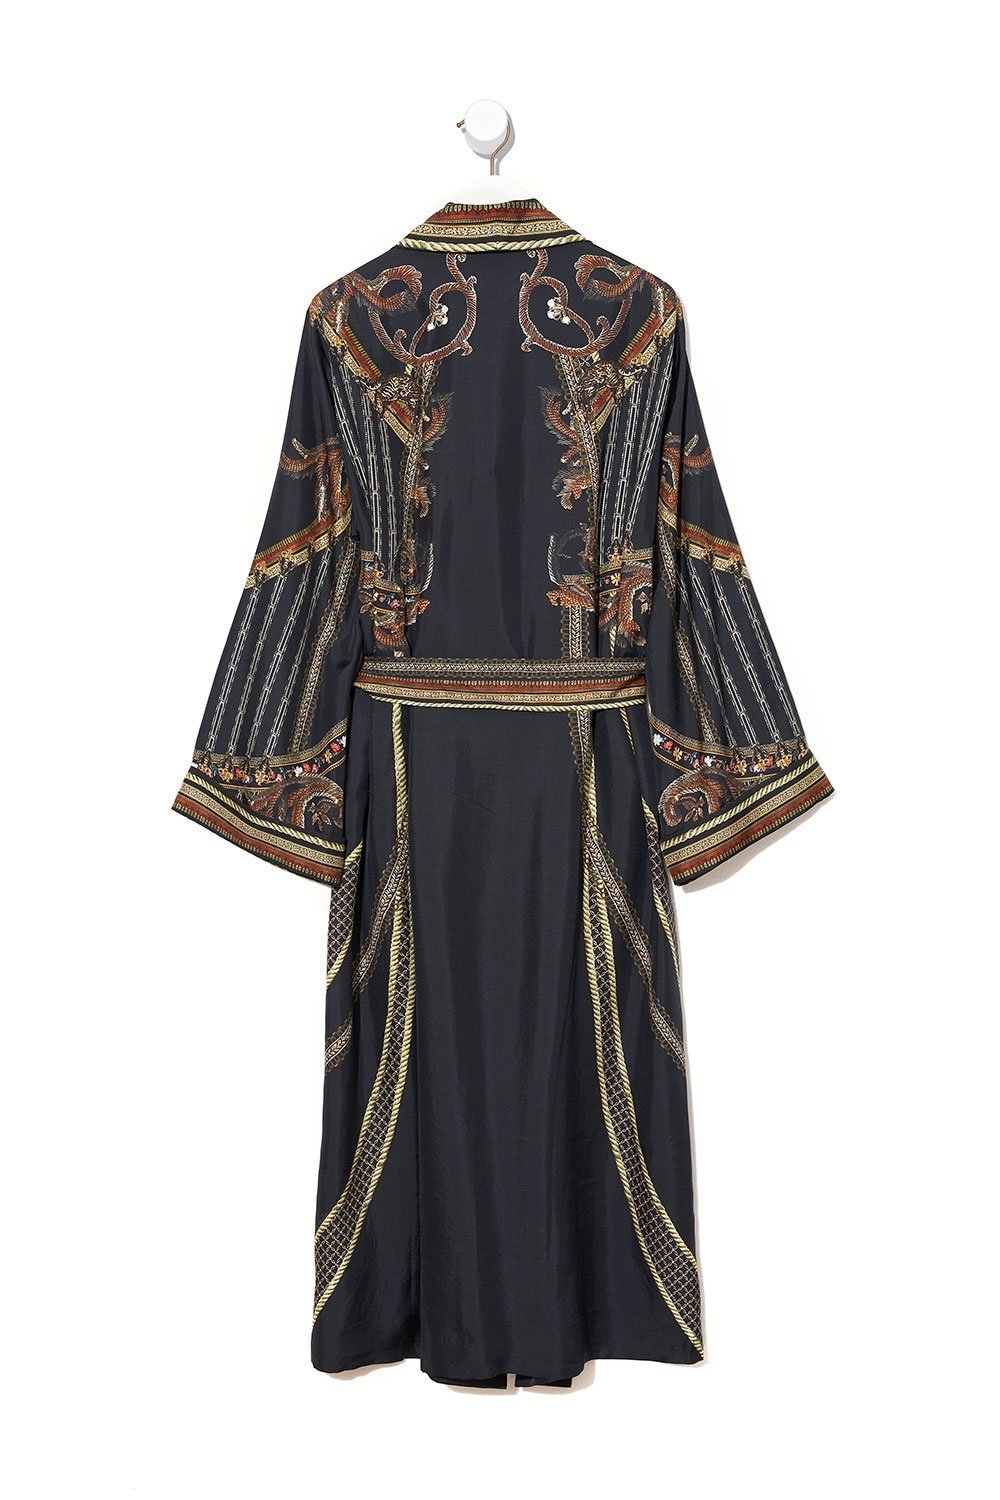 LONG LINE ROBE BELLE OF THE BAROQUE